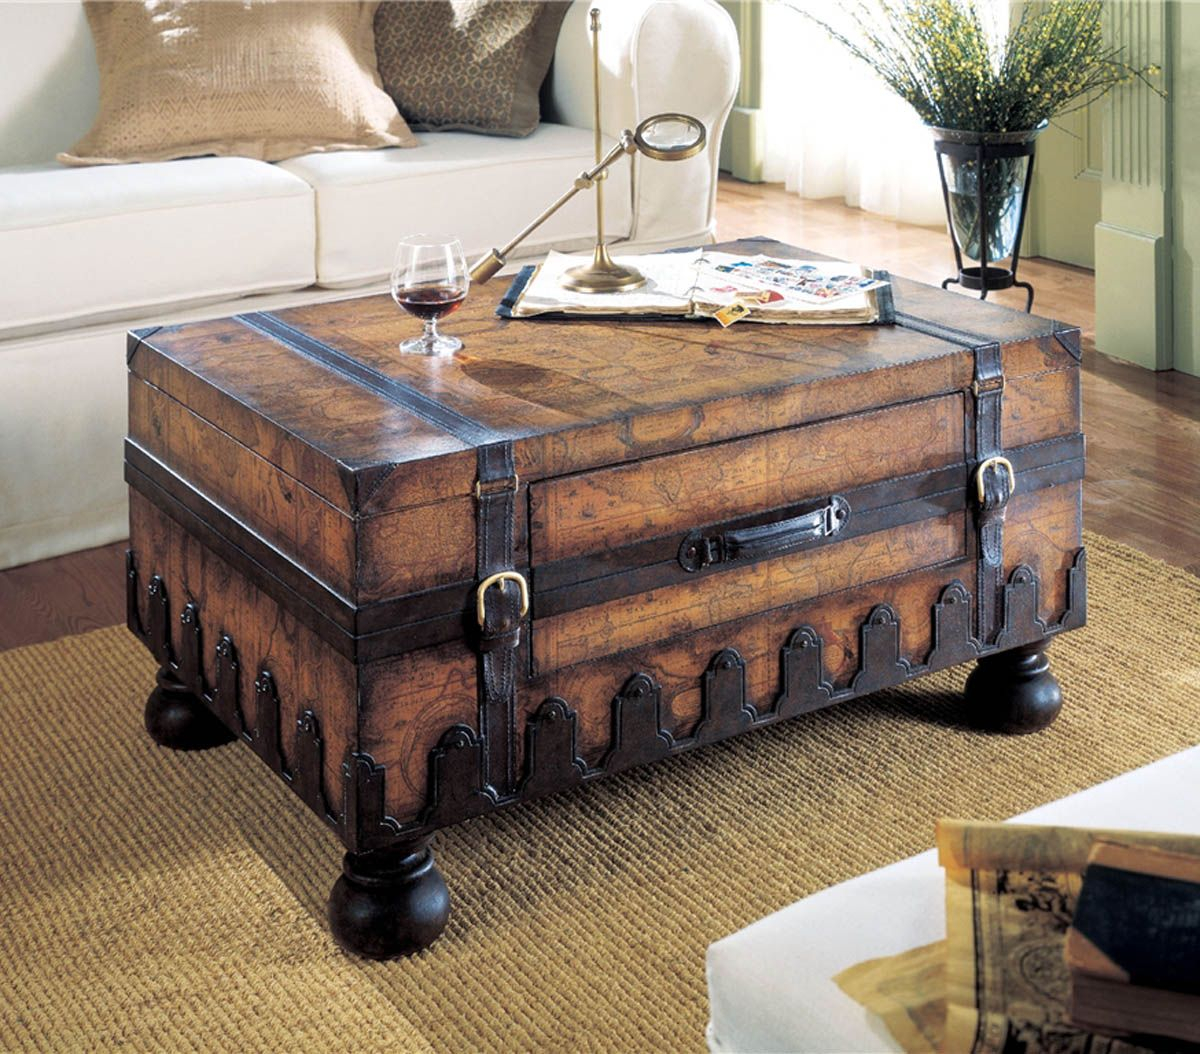 17 Old Trunks Turned Into Beautiful Vintage Table Sarah Trunk within size 1200 X 1054